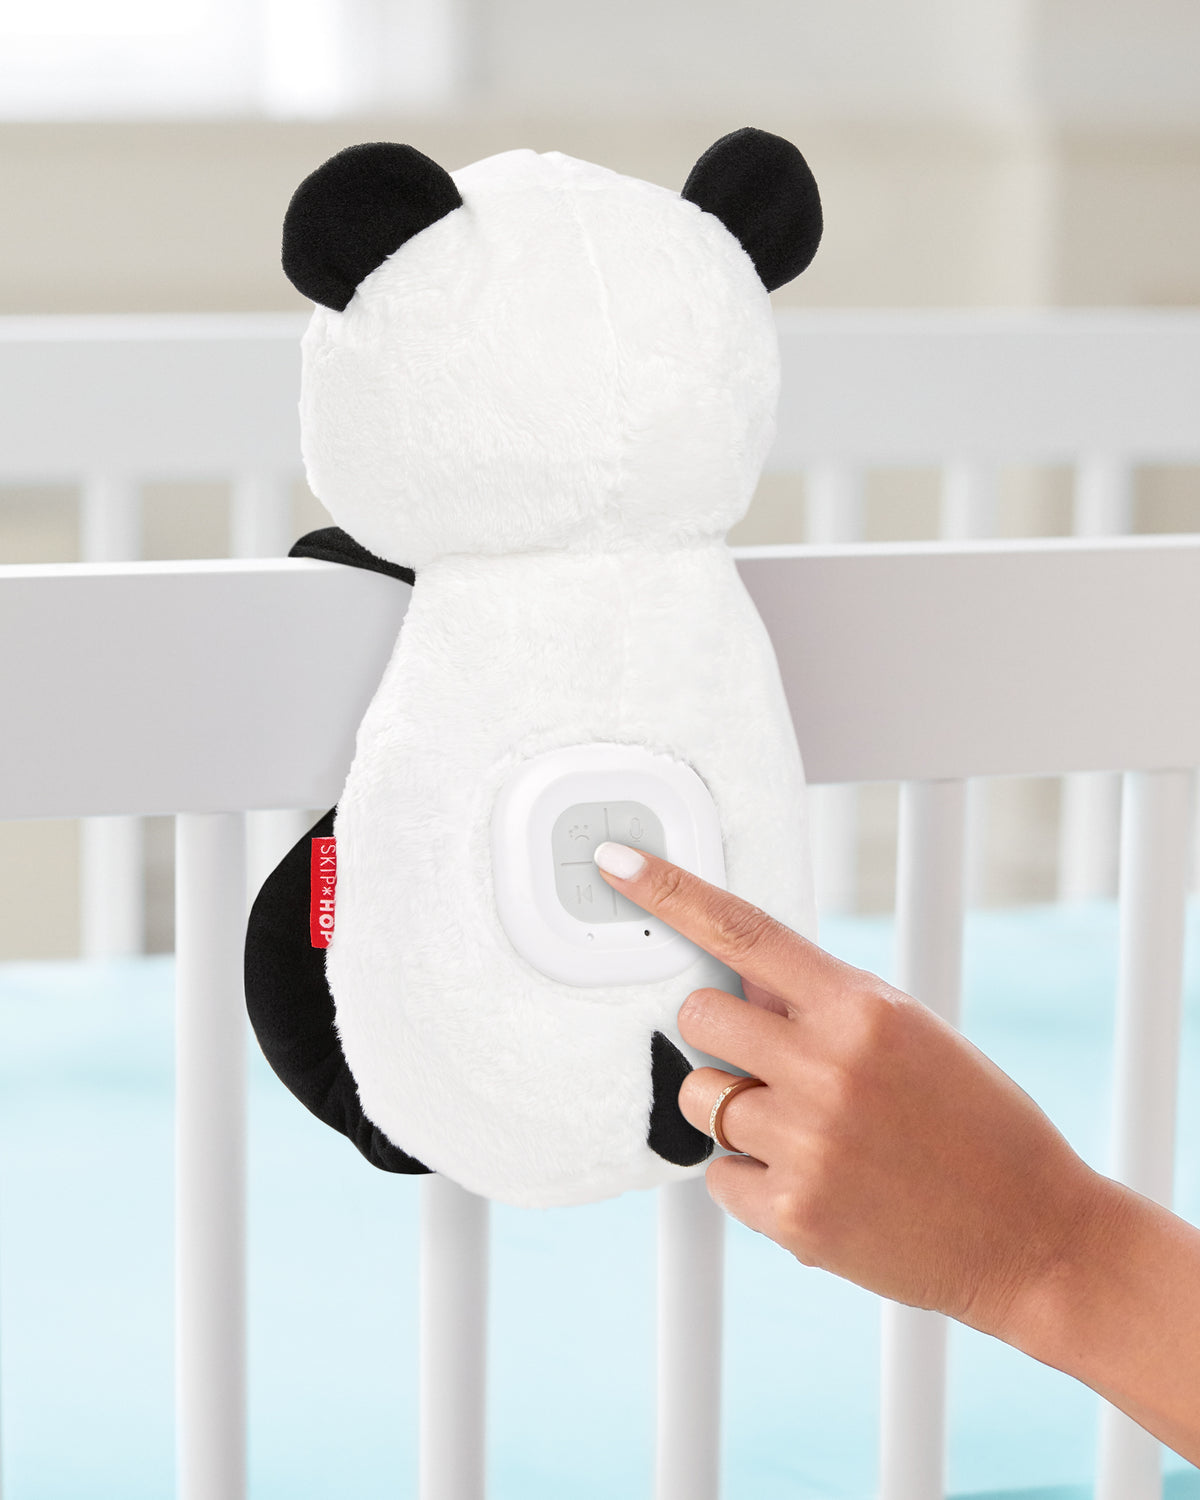 Skip Hop Cry Activated Soother Panda - Einschlafhilfe